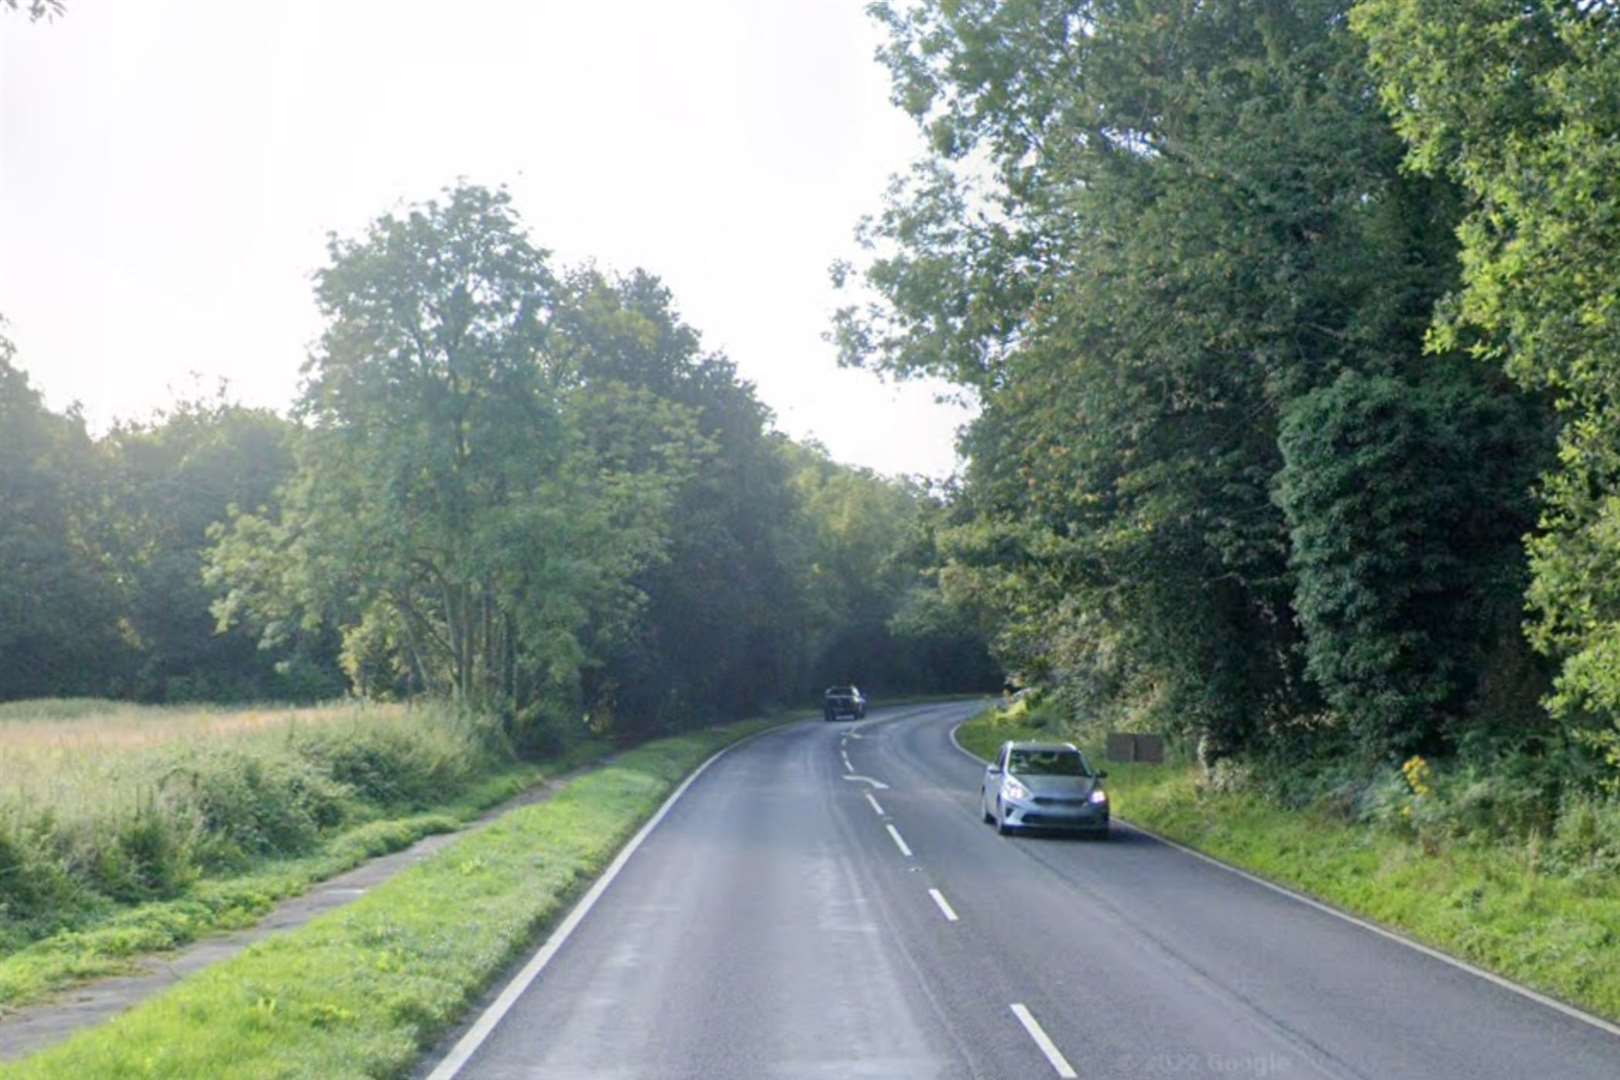 The crash happened on the A20 Hythe Road in Smeeth. Picture: Google